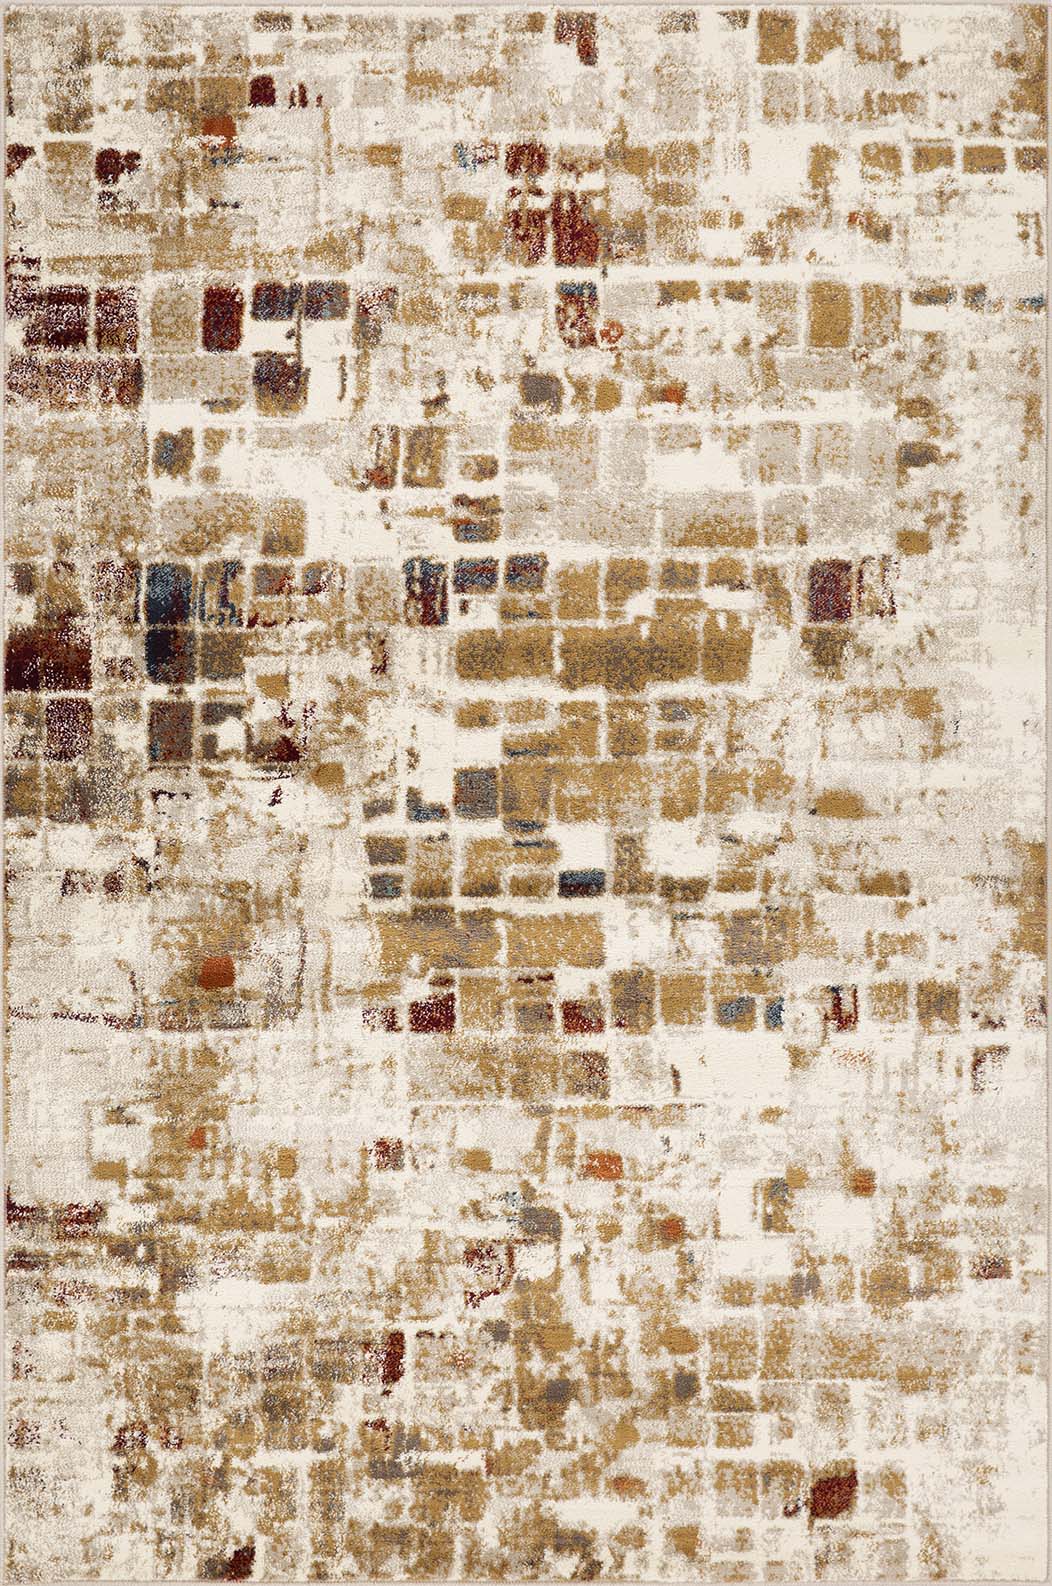 Heritage 9370 Natural Elements Area Rug Product Image